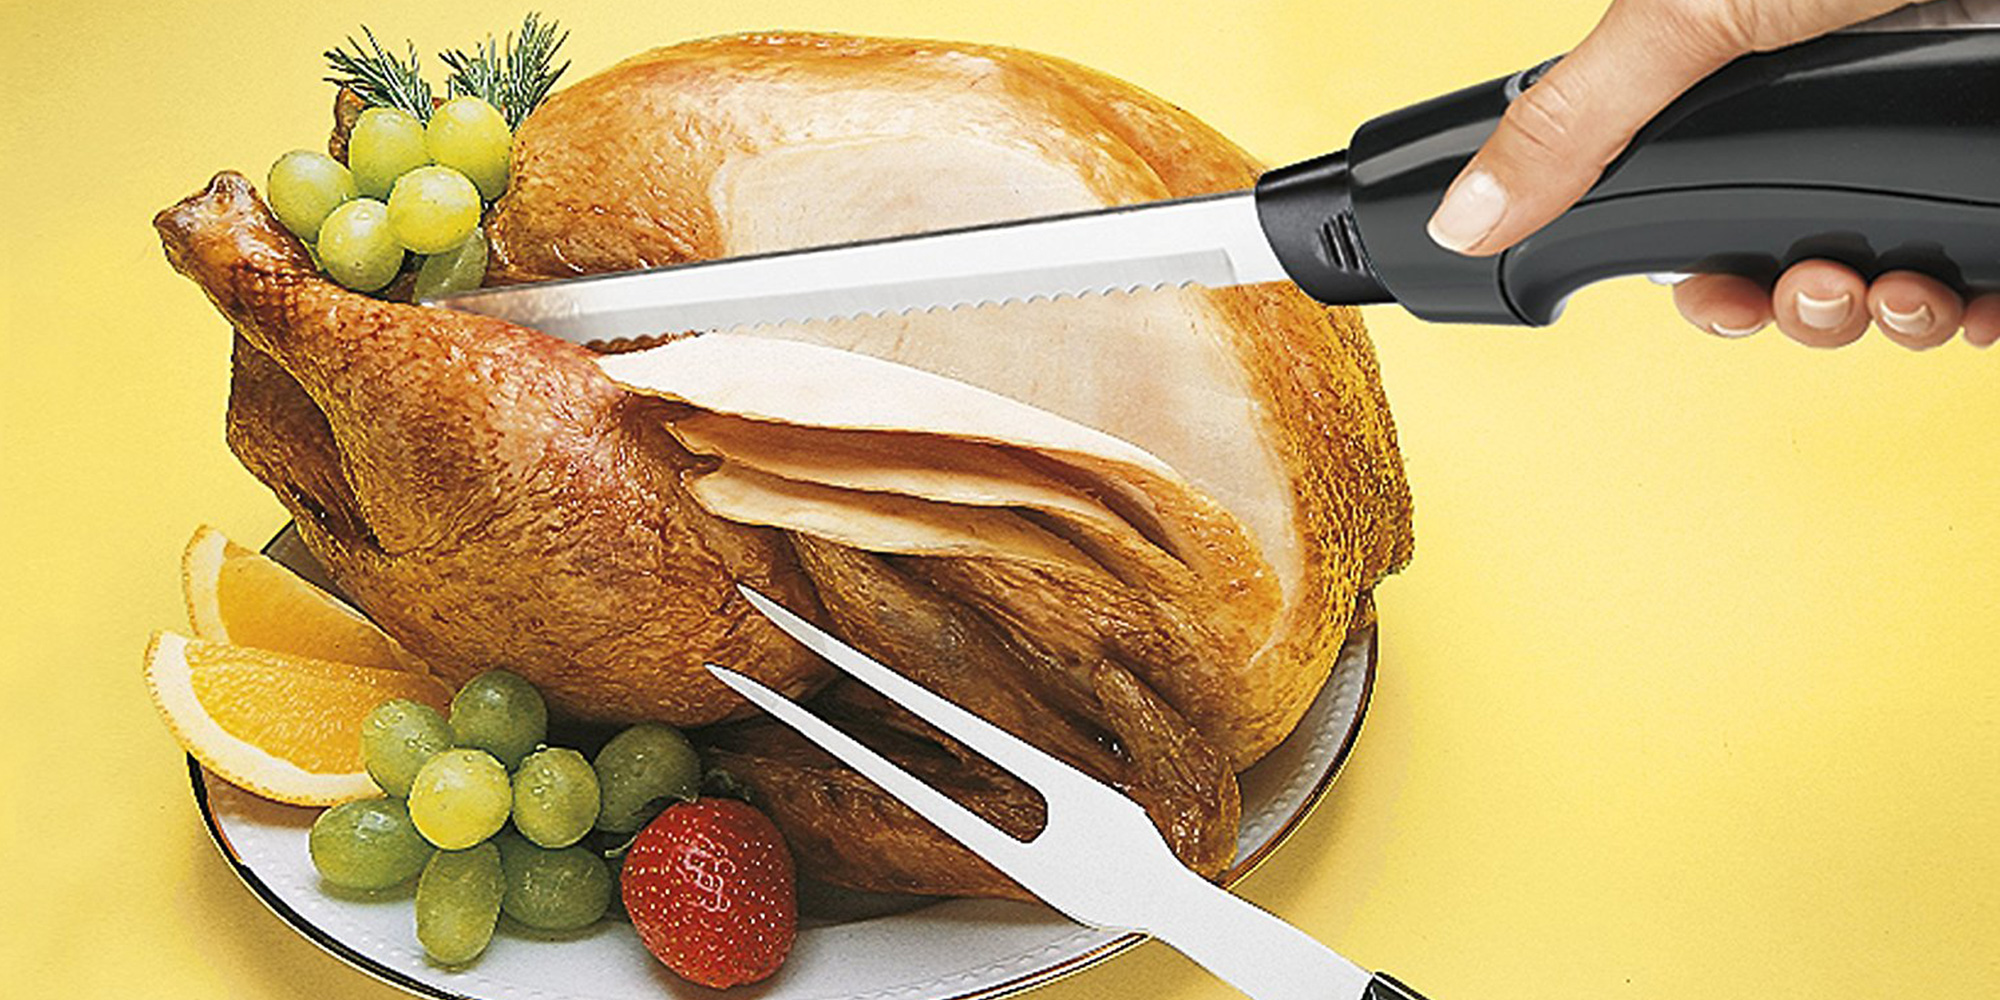 Carving a Turkey with an Electric Knife 